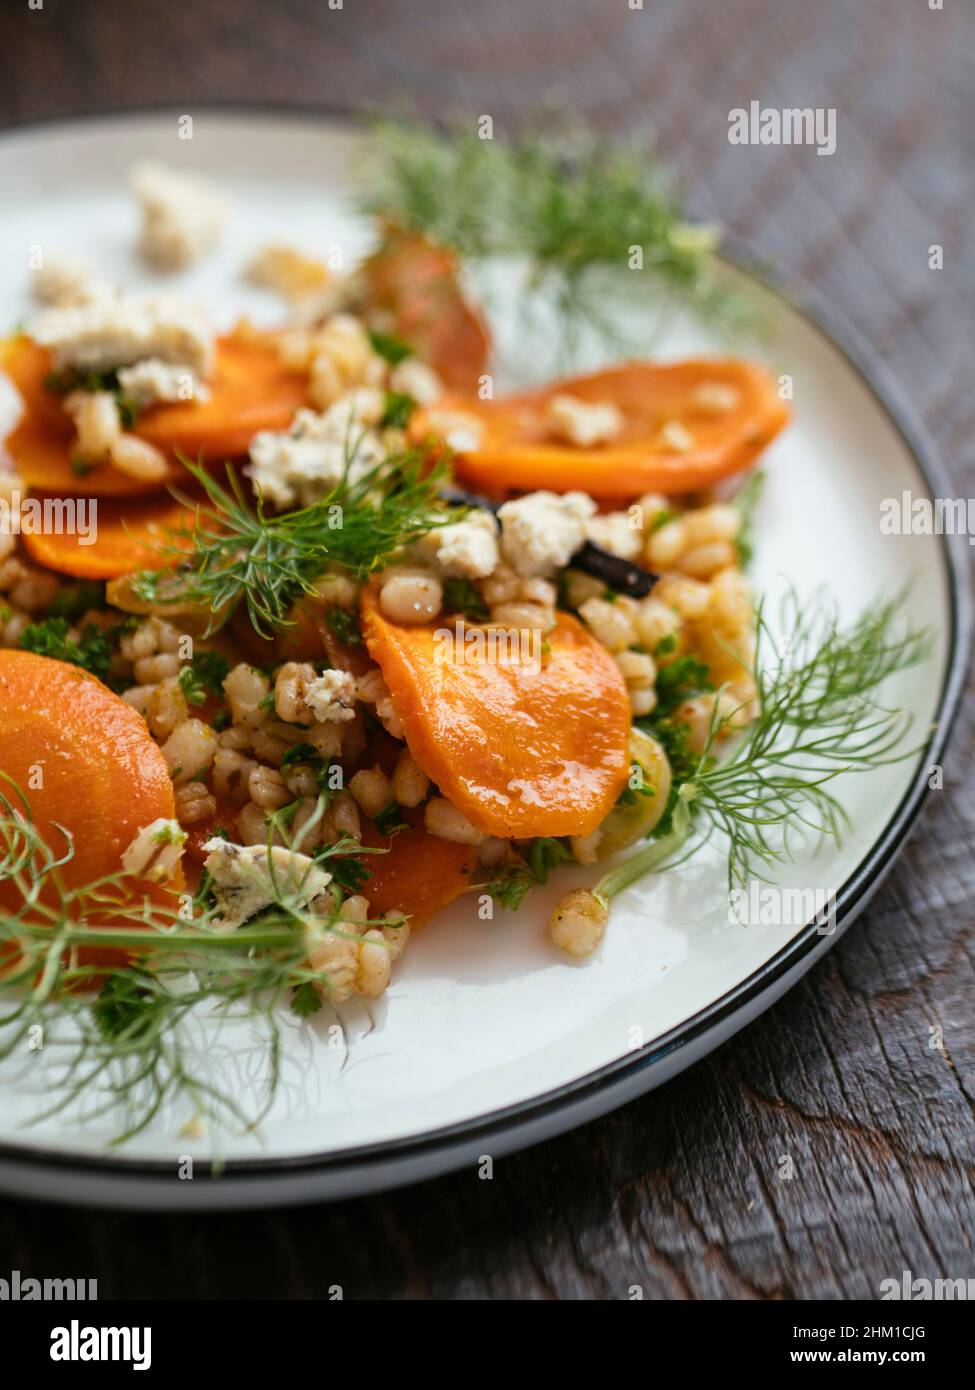 Home made roasted carrot and barley salad with vegan feta. Stock Photo